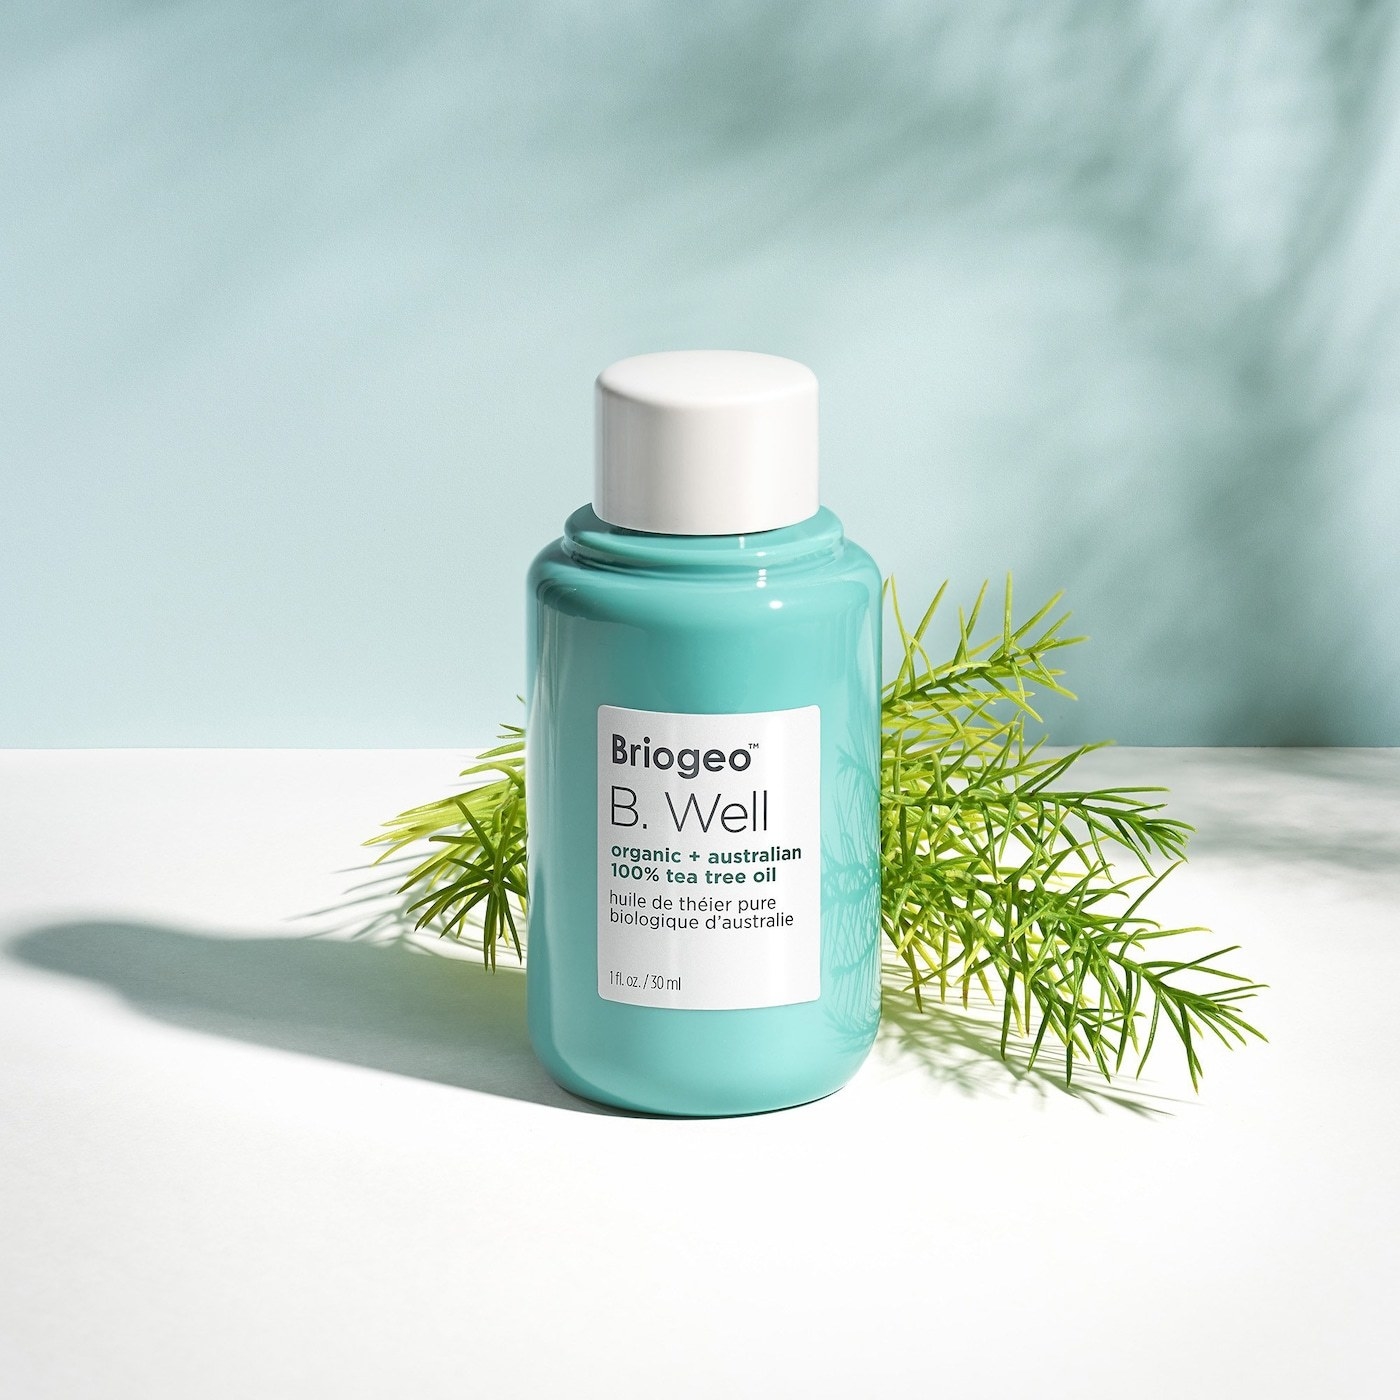 a bottle of tea tree oil styled with fresh greenery